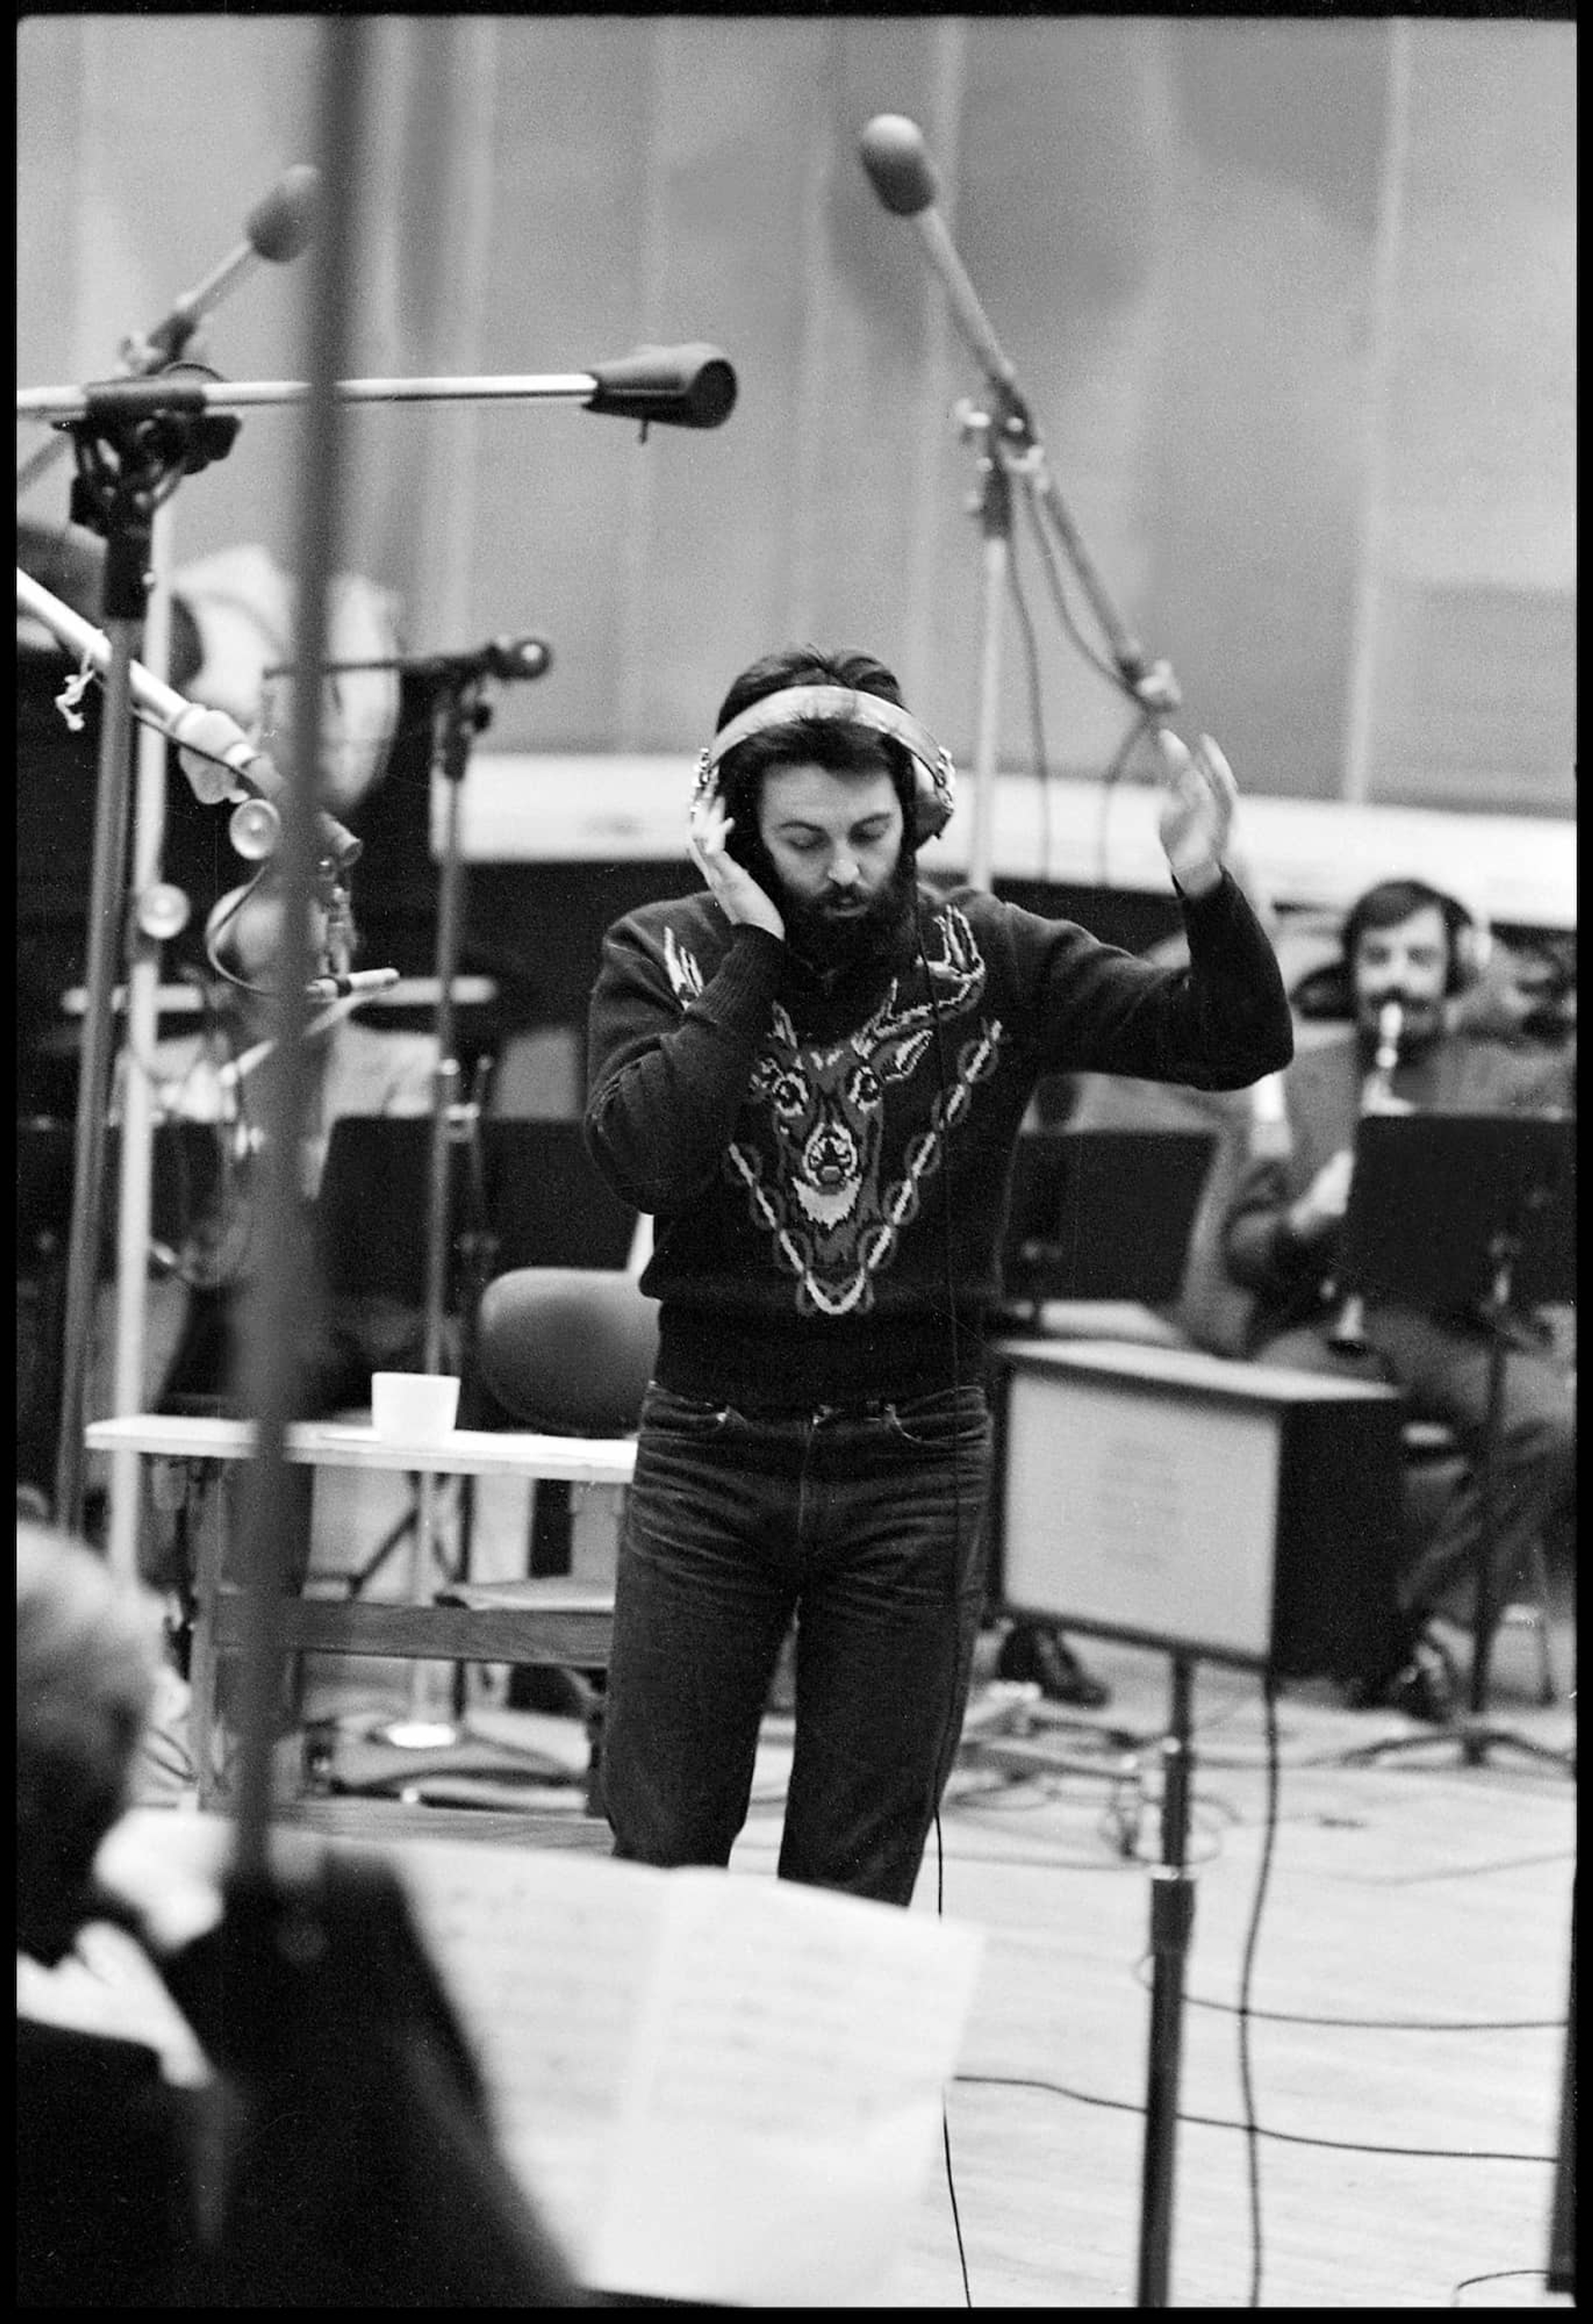 Black and white photo of Paul in the studio conducting musicians